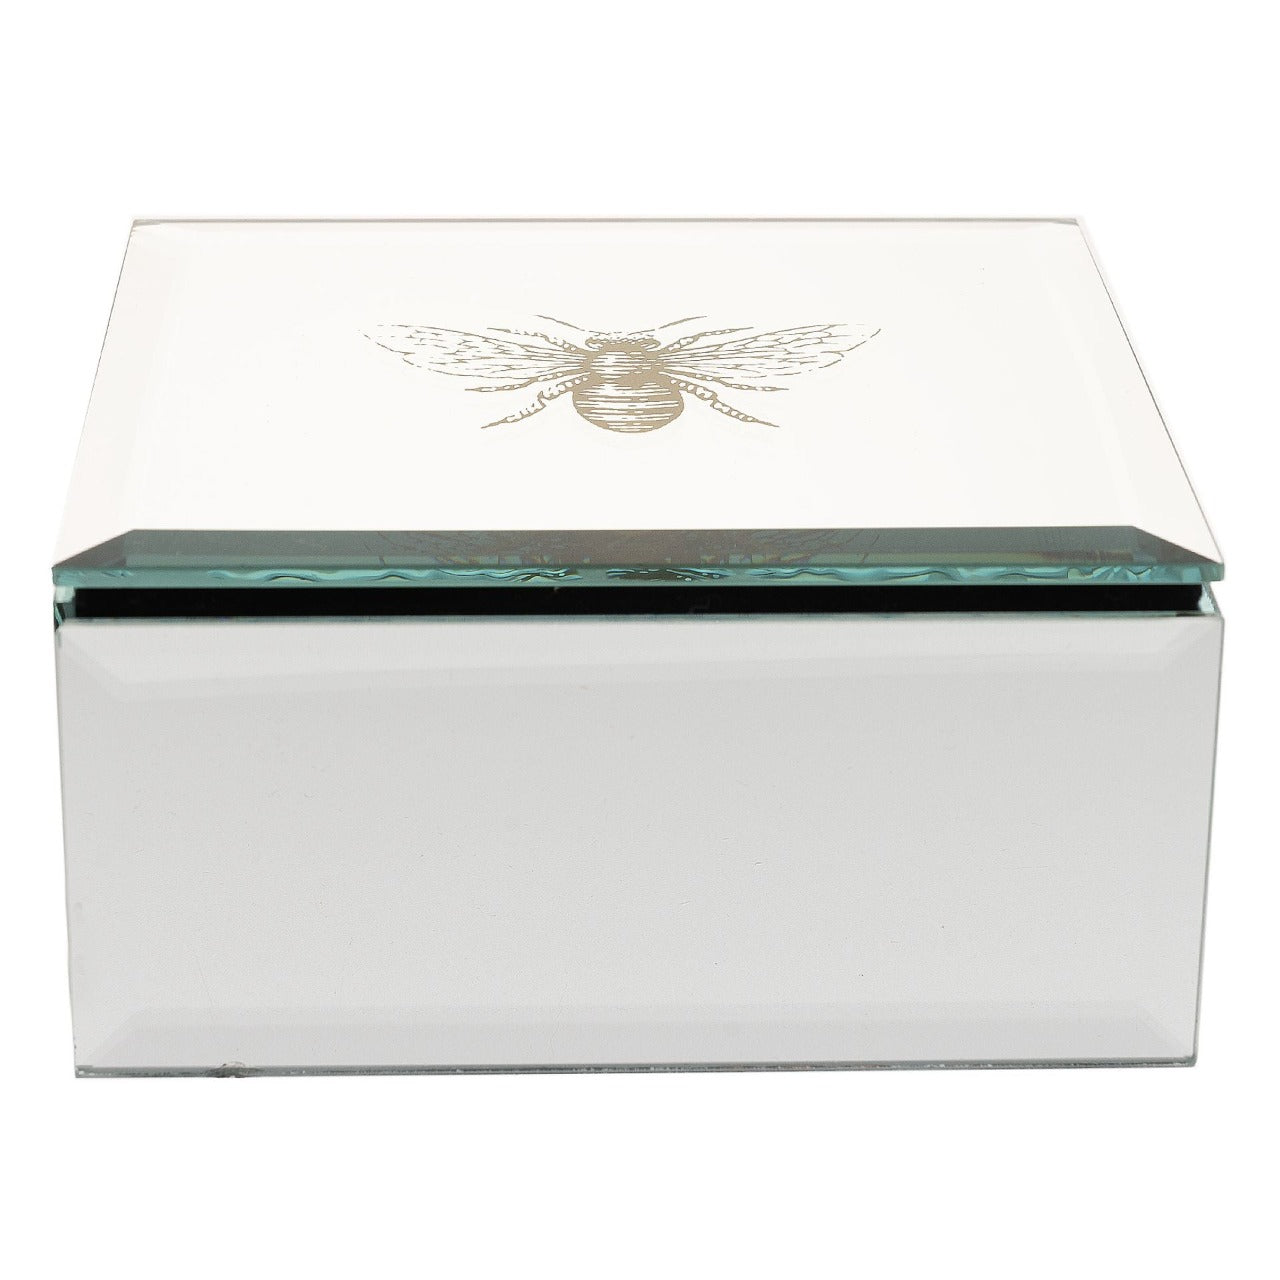 HESTIA Glass Trinket Box Gold Bee  This stunning trinket box will keep all your precious items safe while bringing refreshing style.